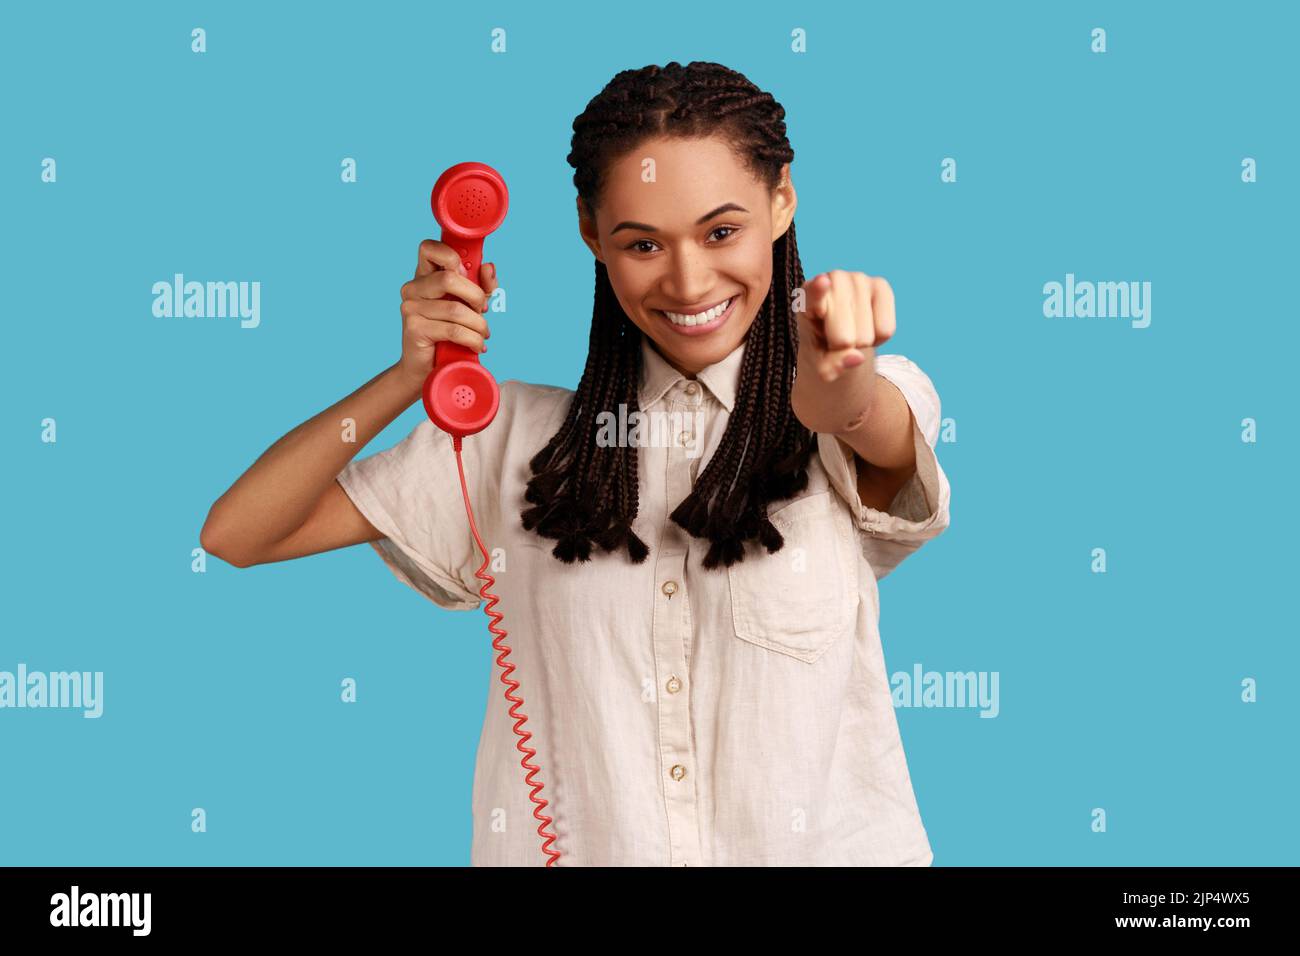 Beautiful woman with black dreadlocks pointing finger to camera, holding handset of red vintage landline phone, answering calls, wearing white shirt. Indoor studio shot isolated on blue background. Stock Photo